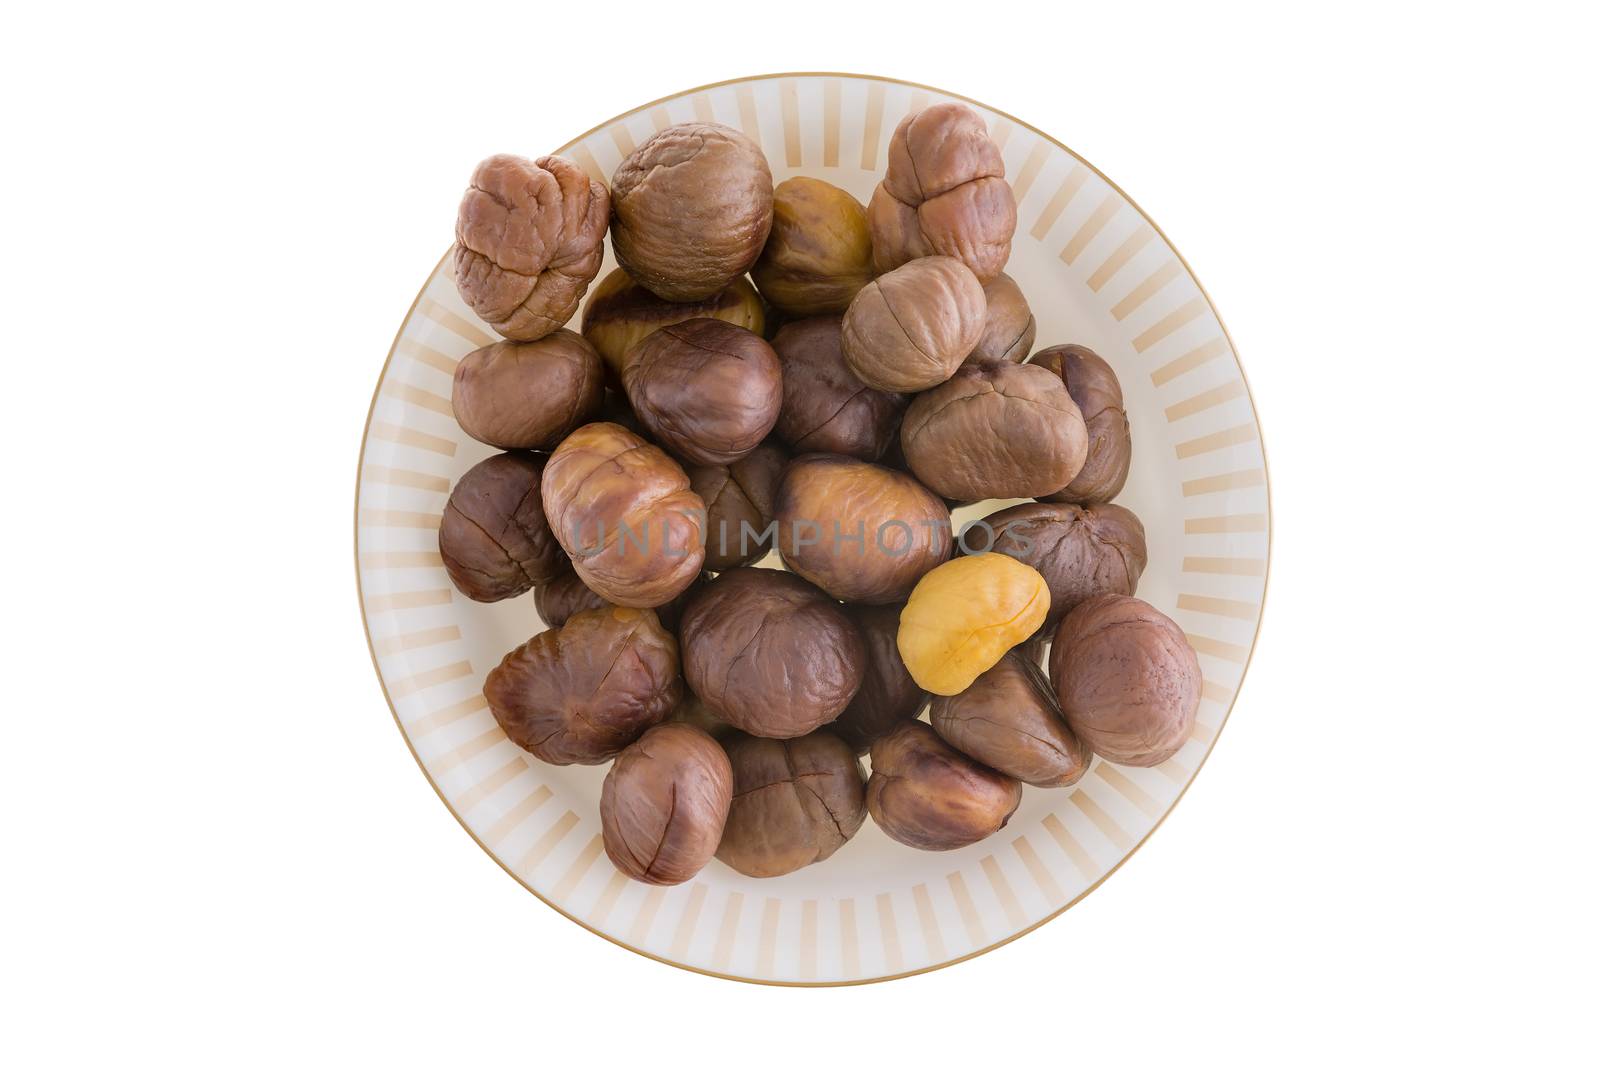 Fresh roasted peeled or shelled whole chestnuts on a plate for a delicious seasonal autumn snack, over a white background